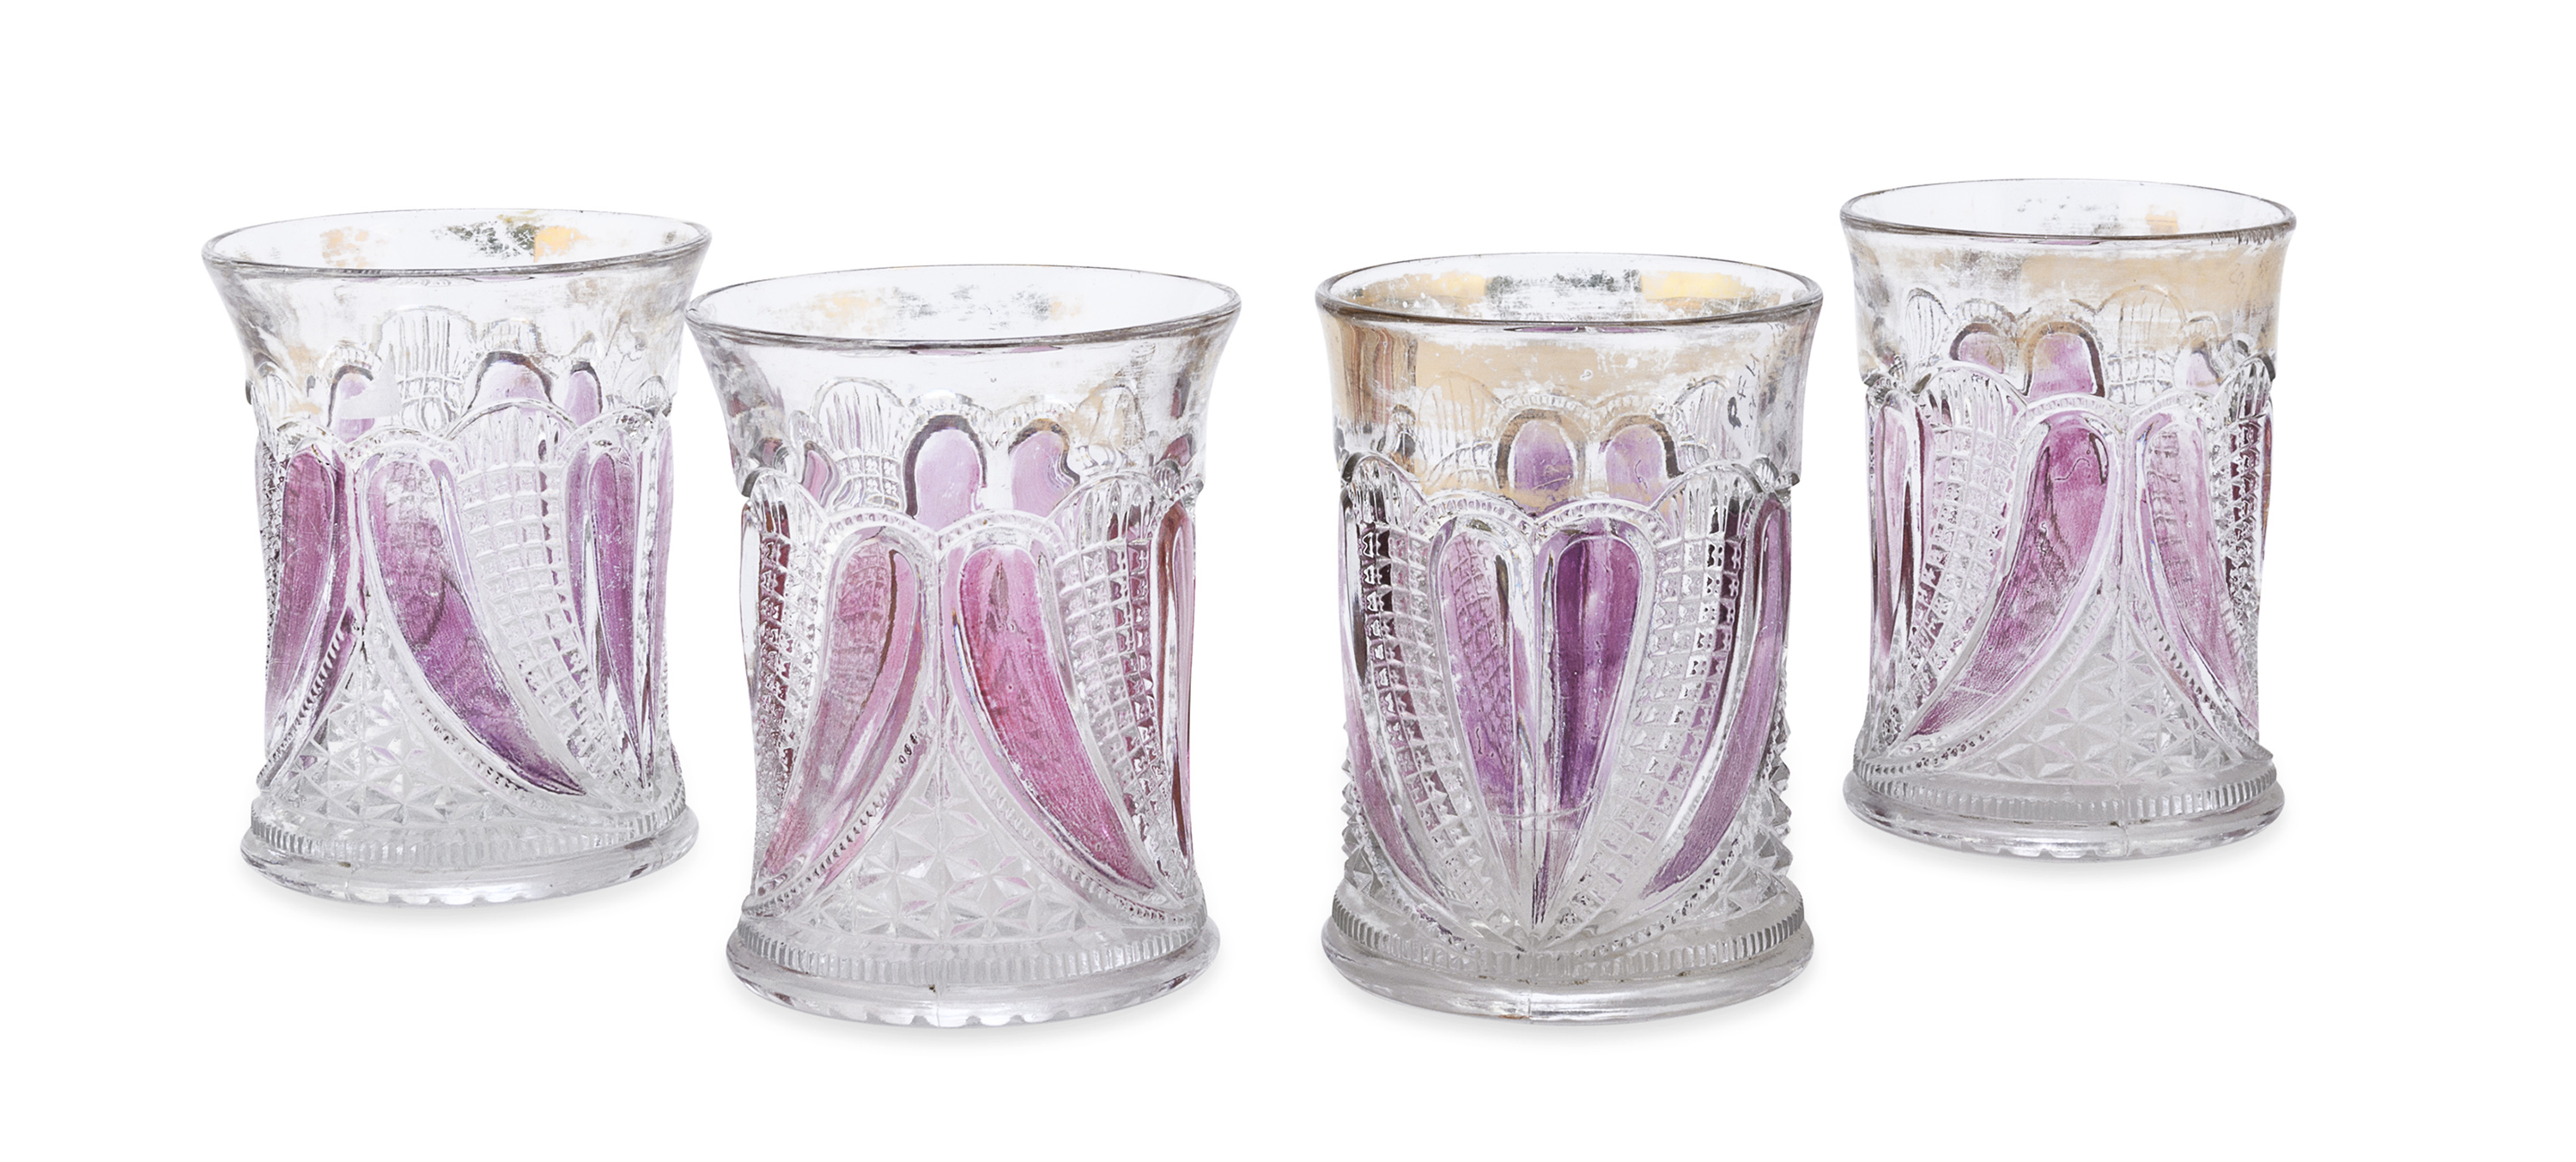 FOUR CUT GLASS CUPS EARLY 20TH CENTURY